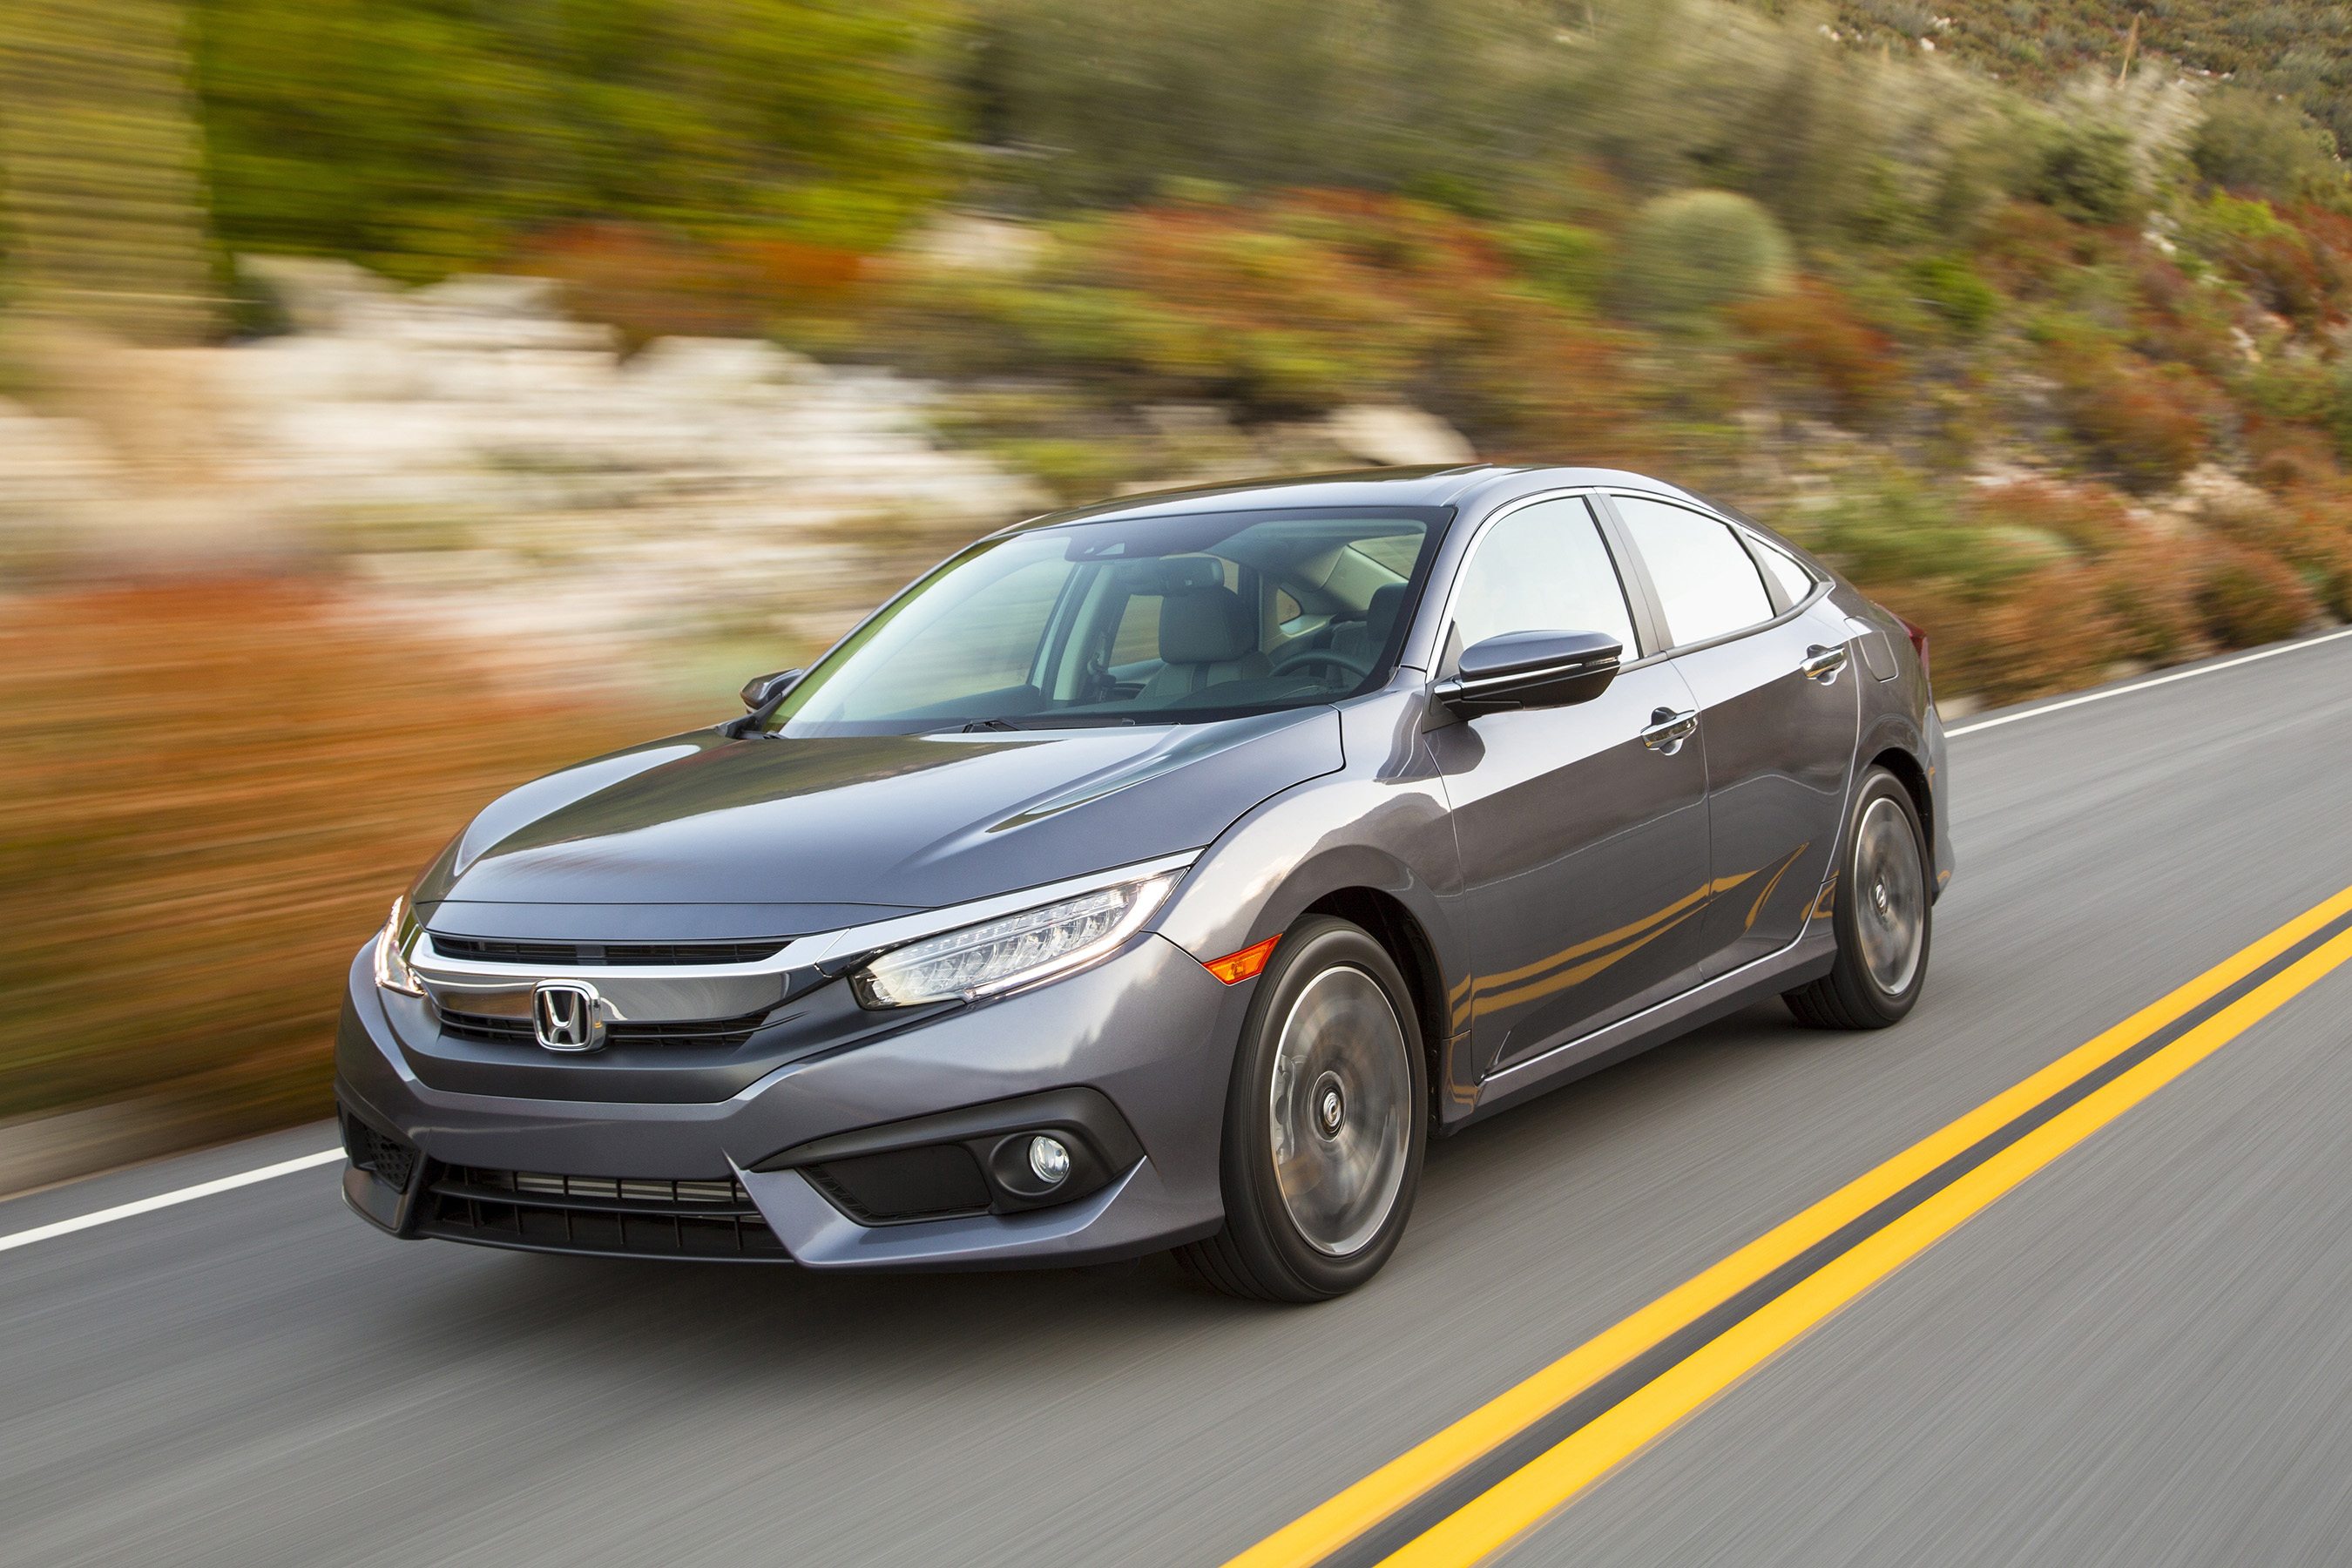 KBB.com 10 Coolest Cars: Our Overall Best Buy for 2016, the 2016 Civic is among the roomiest, most comfortable, most fun to drive, most efficient and most feature-packed cars in the class.